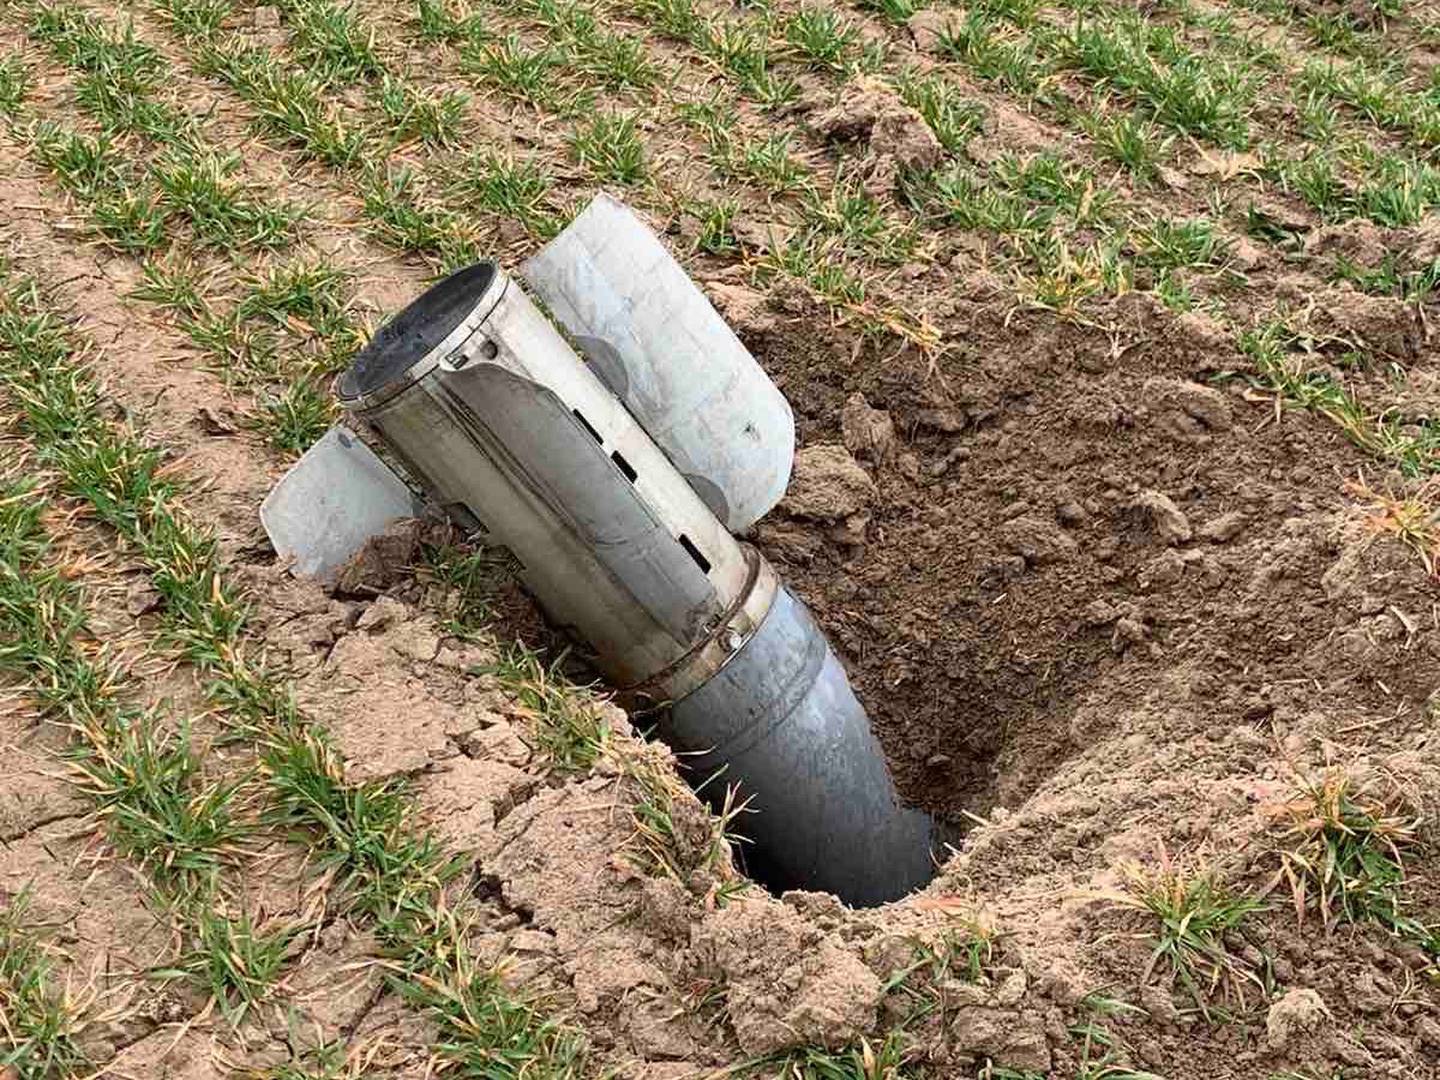 A Smerch rocket that landed in a field on the farm. Photo: Aivaras Abromavicius